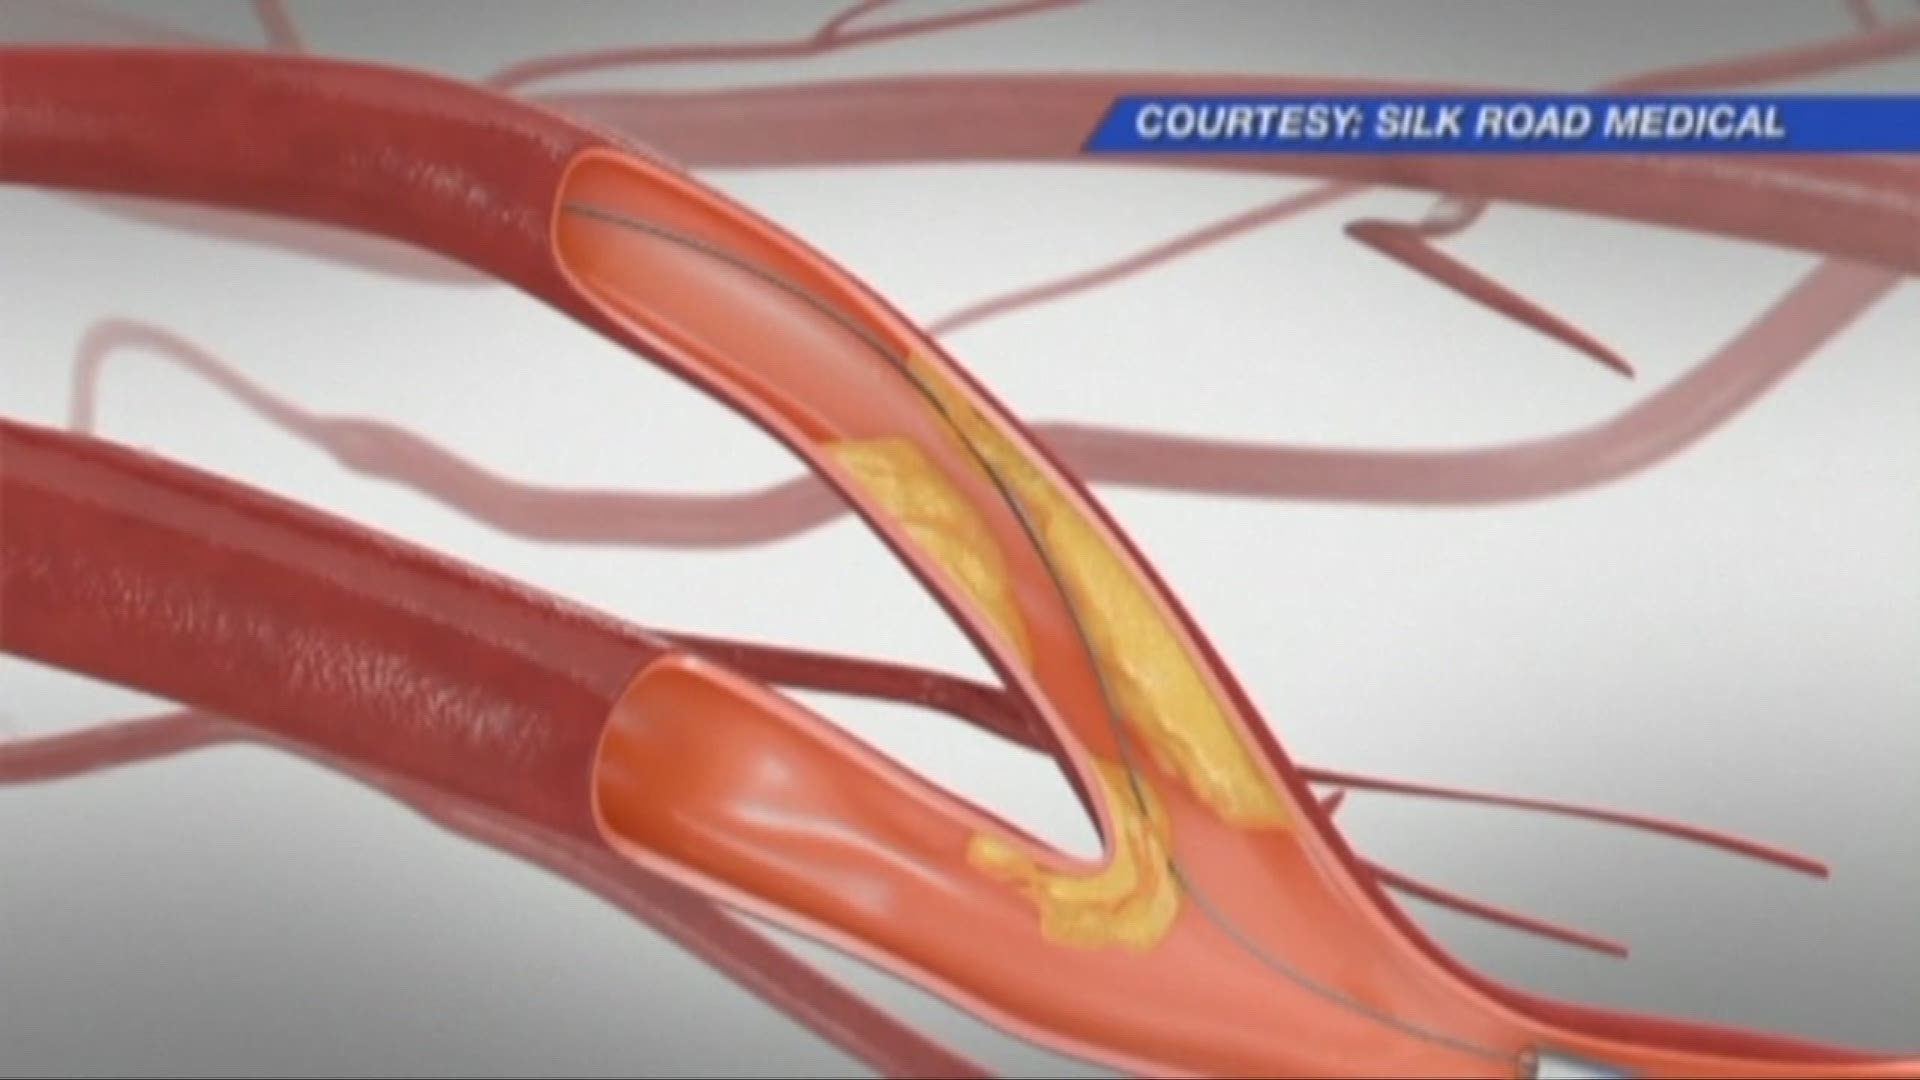 New treatment for plaque buildup in arteries